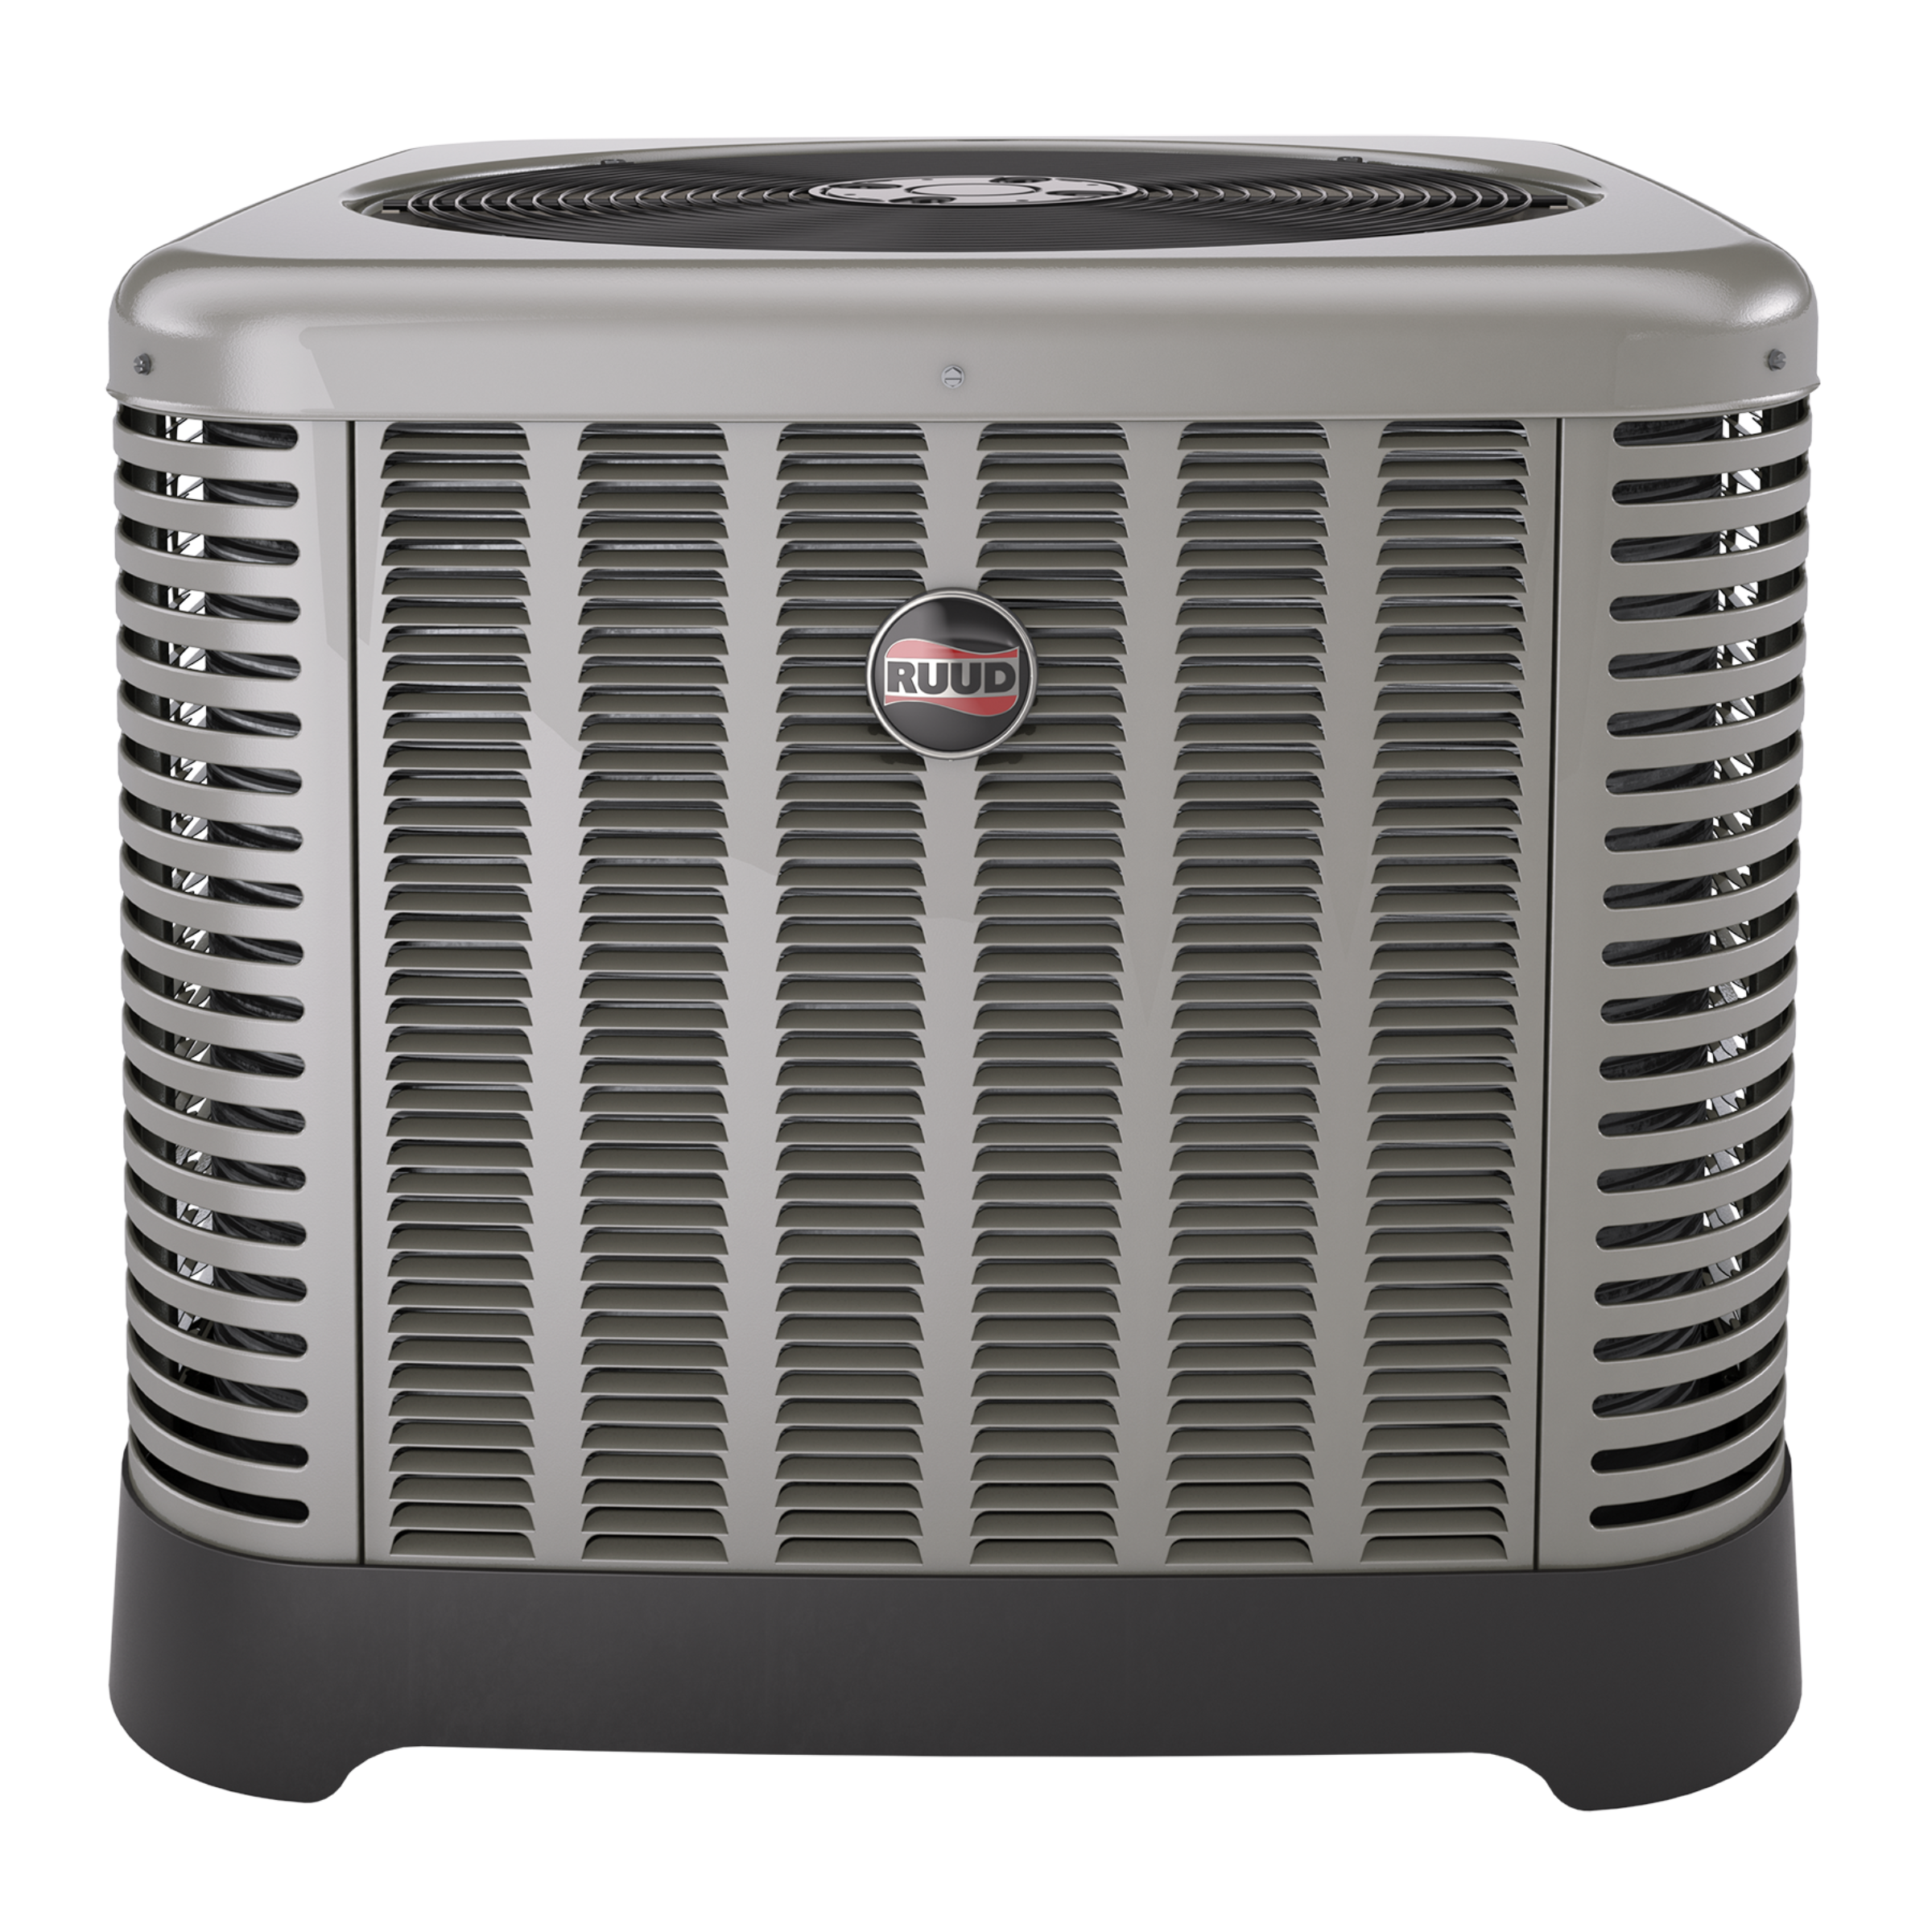 RA16 Ruud Achiever Series Single Stage Air Conditioning Condensing Unit 16 SEER/13 EER, 1 1/2 to 5 Tons, Cooling Capacities 17.3 to 60.5 kBTU, 208-230V/1Ph/60Hz